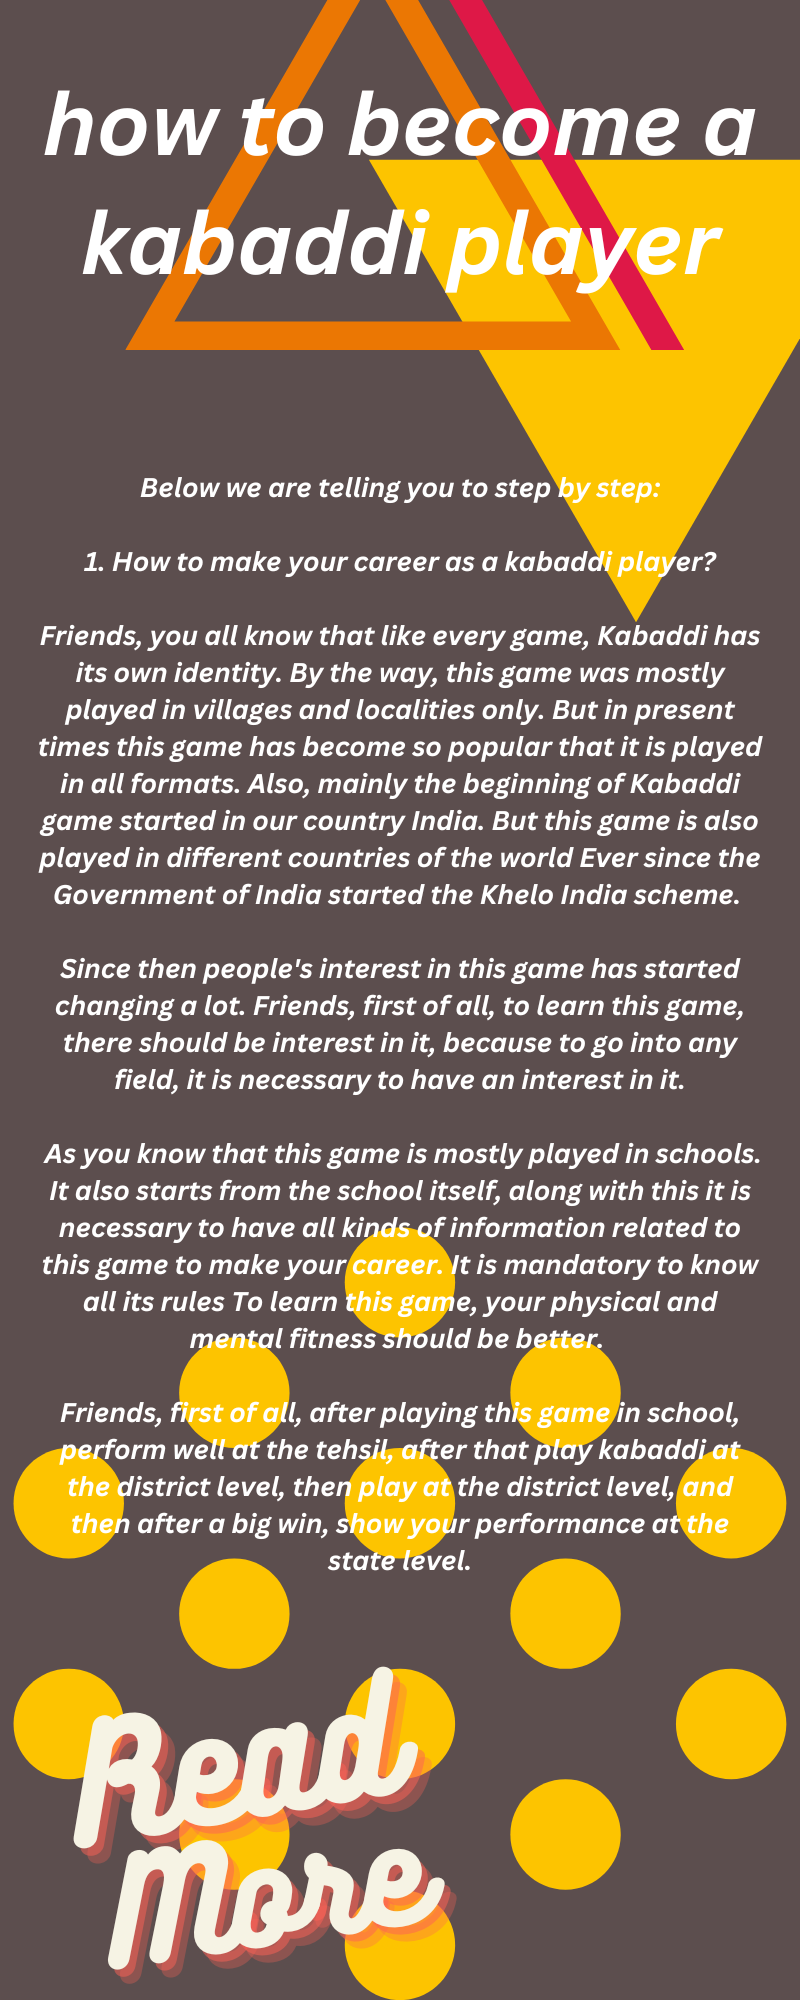 how to become a kabaddi player